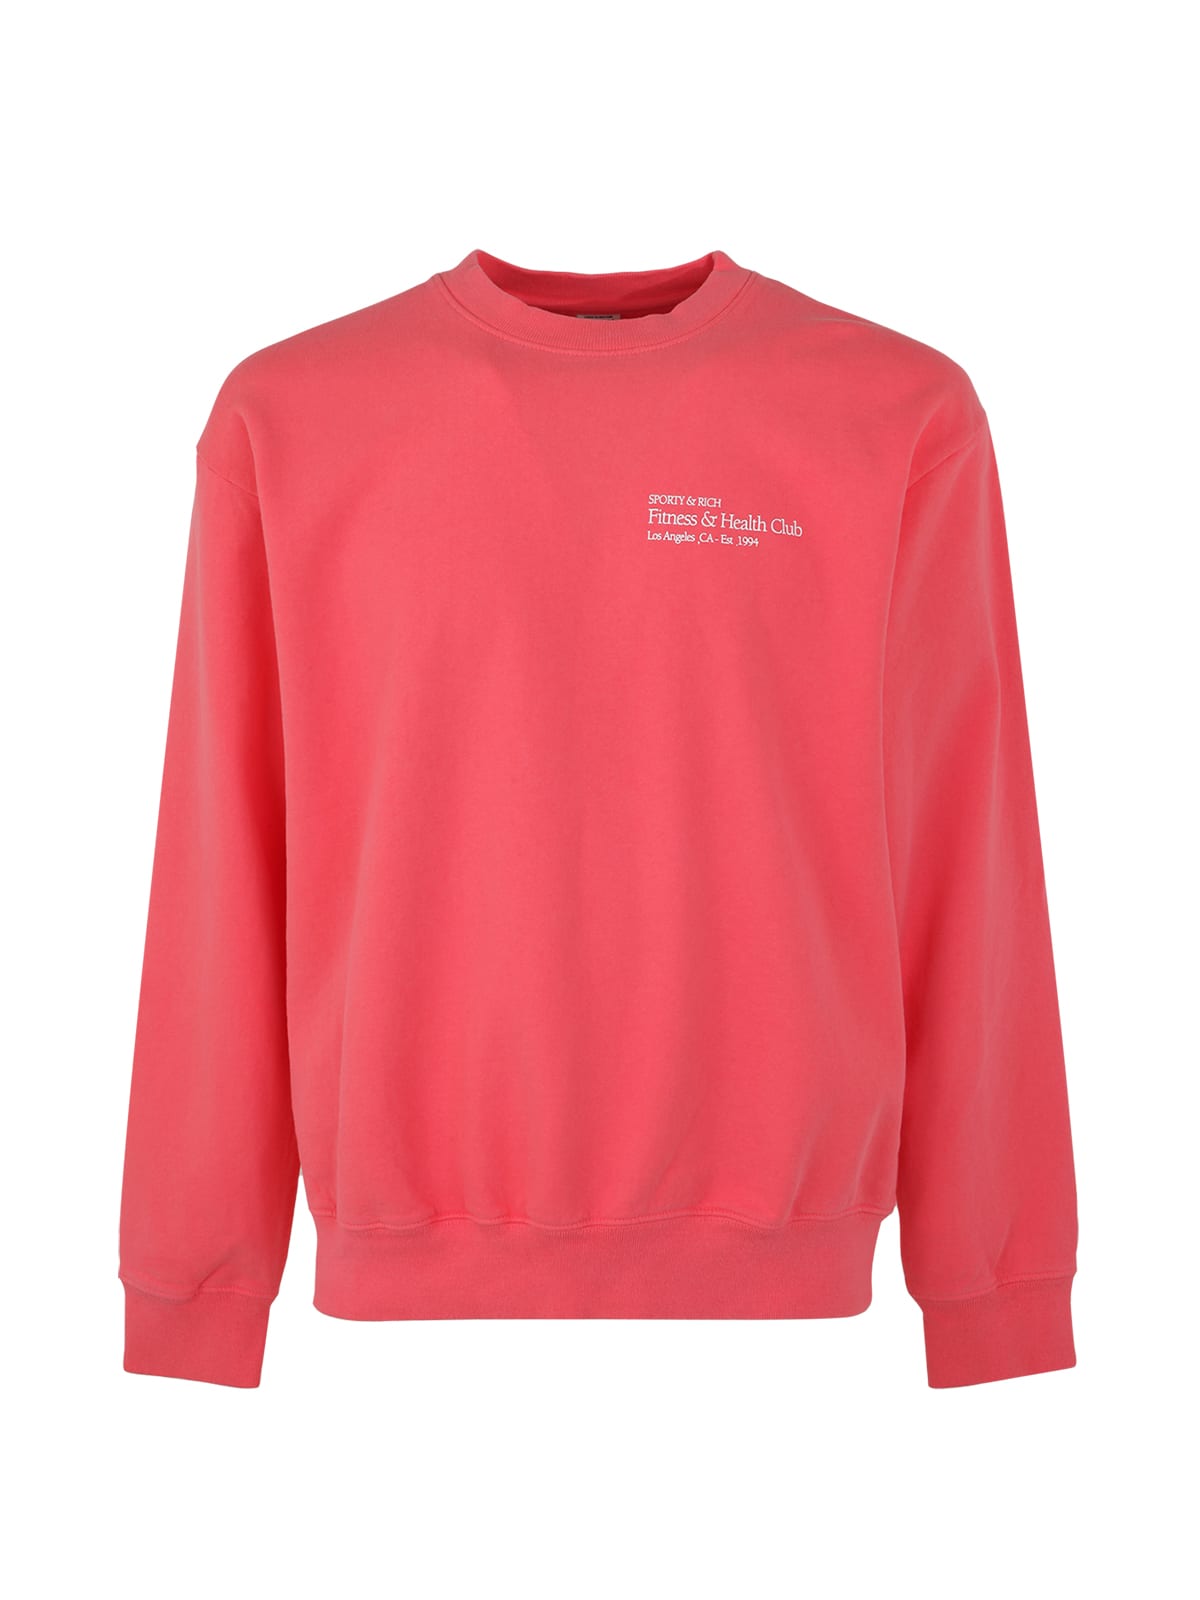 Sporty & Rich Fitness And Health Club Crewneck